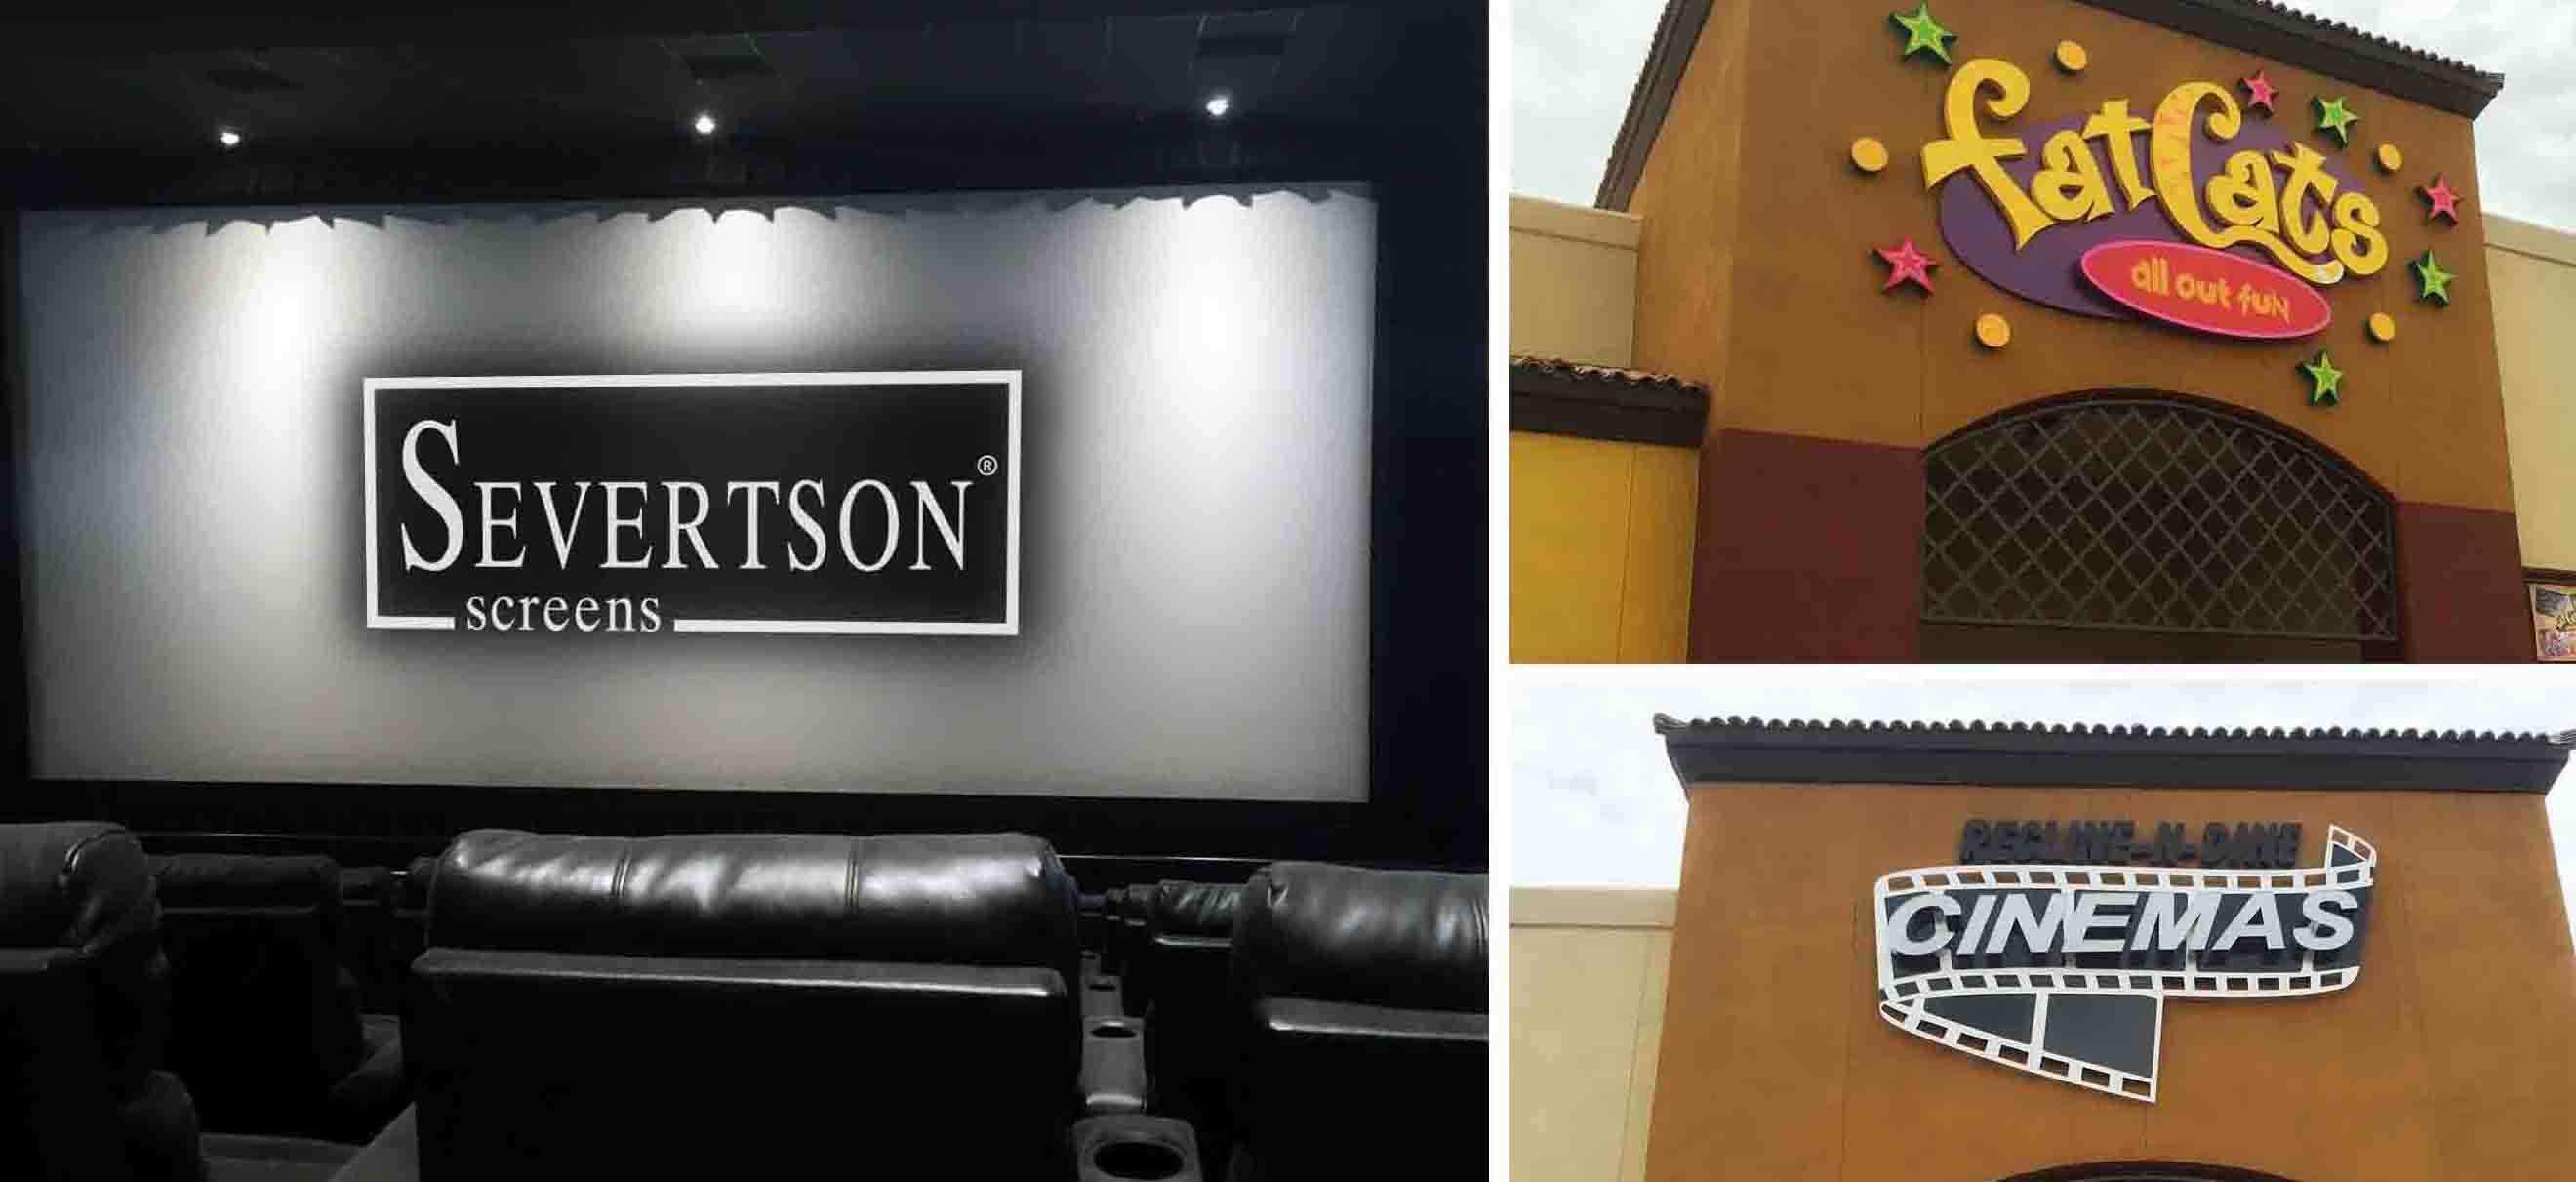 Severtson Screens Supplies Fatcats With Multiple Custom Cinema Projection Screens In New Arizona Location